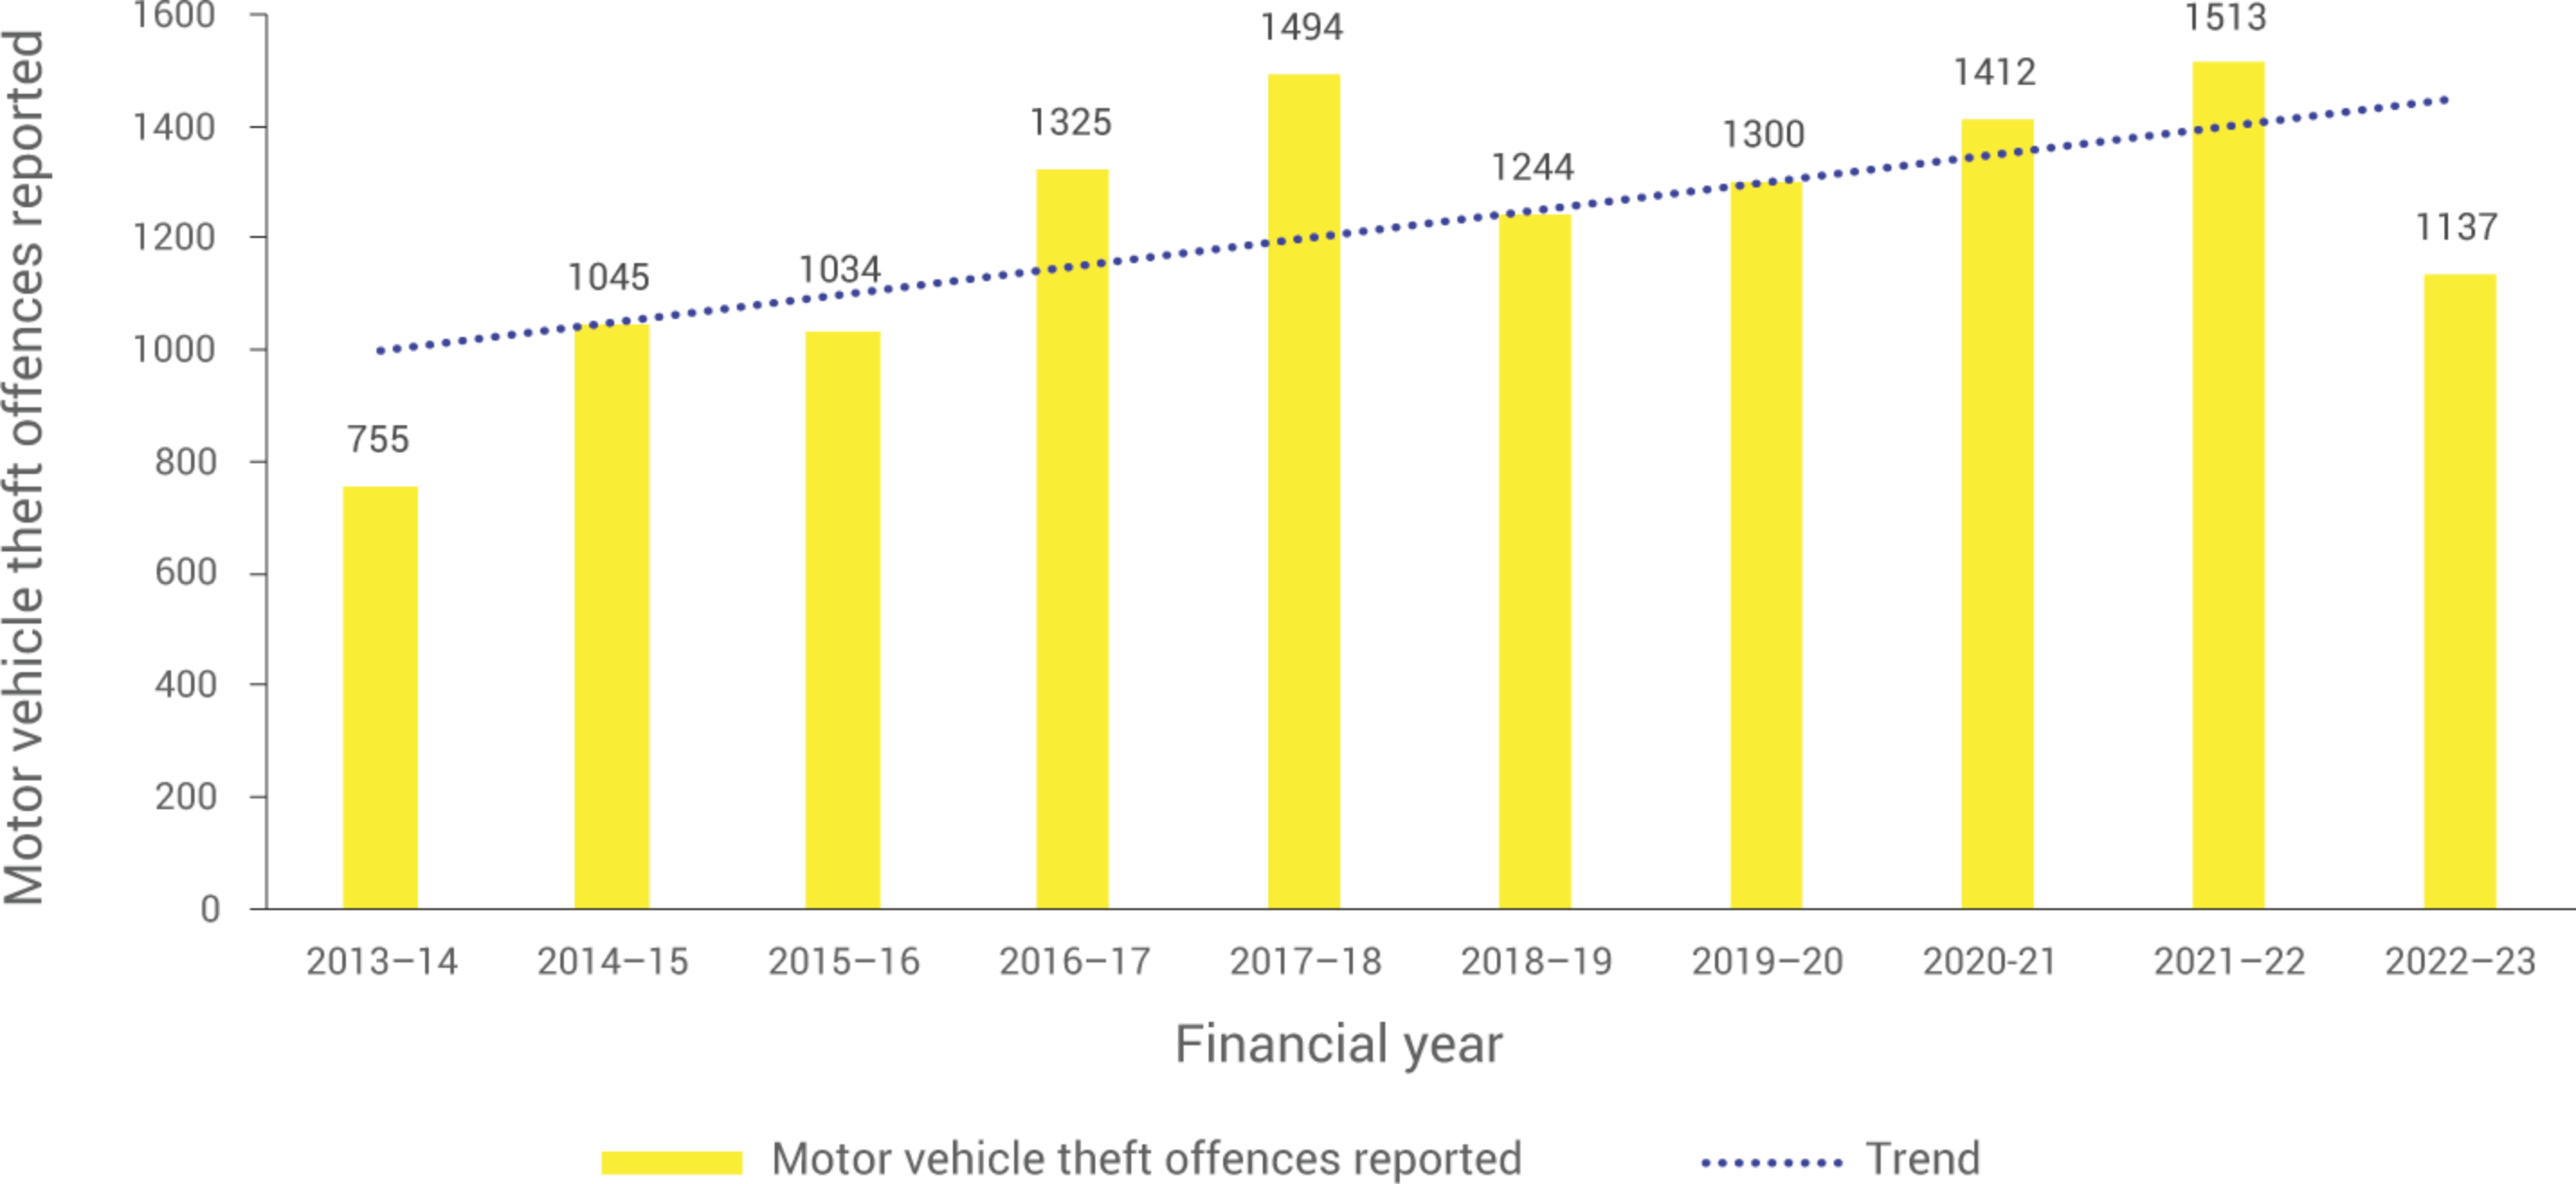 This Figure is a column graph depicting motor vehicle theft offences reported over a ten-year period, from the 2013-14 financial year to the 2022-23 financial year.